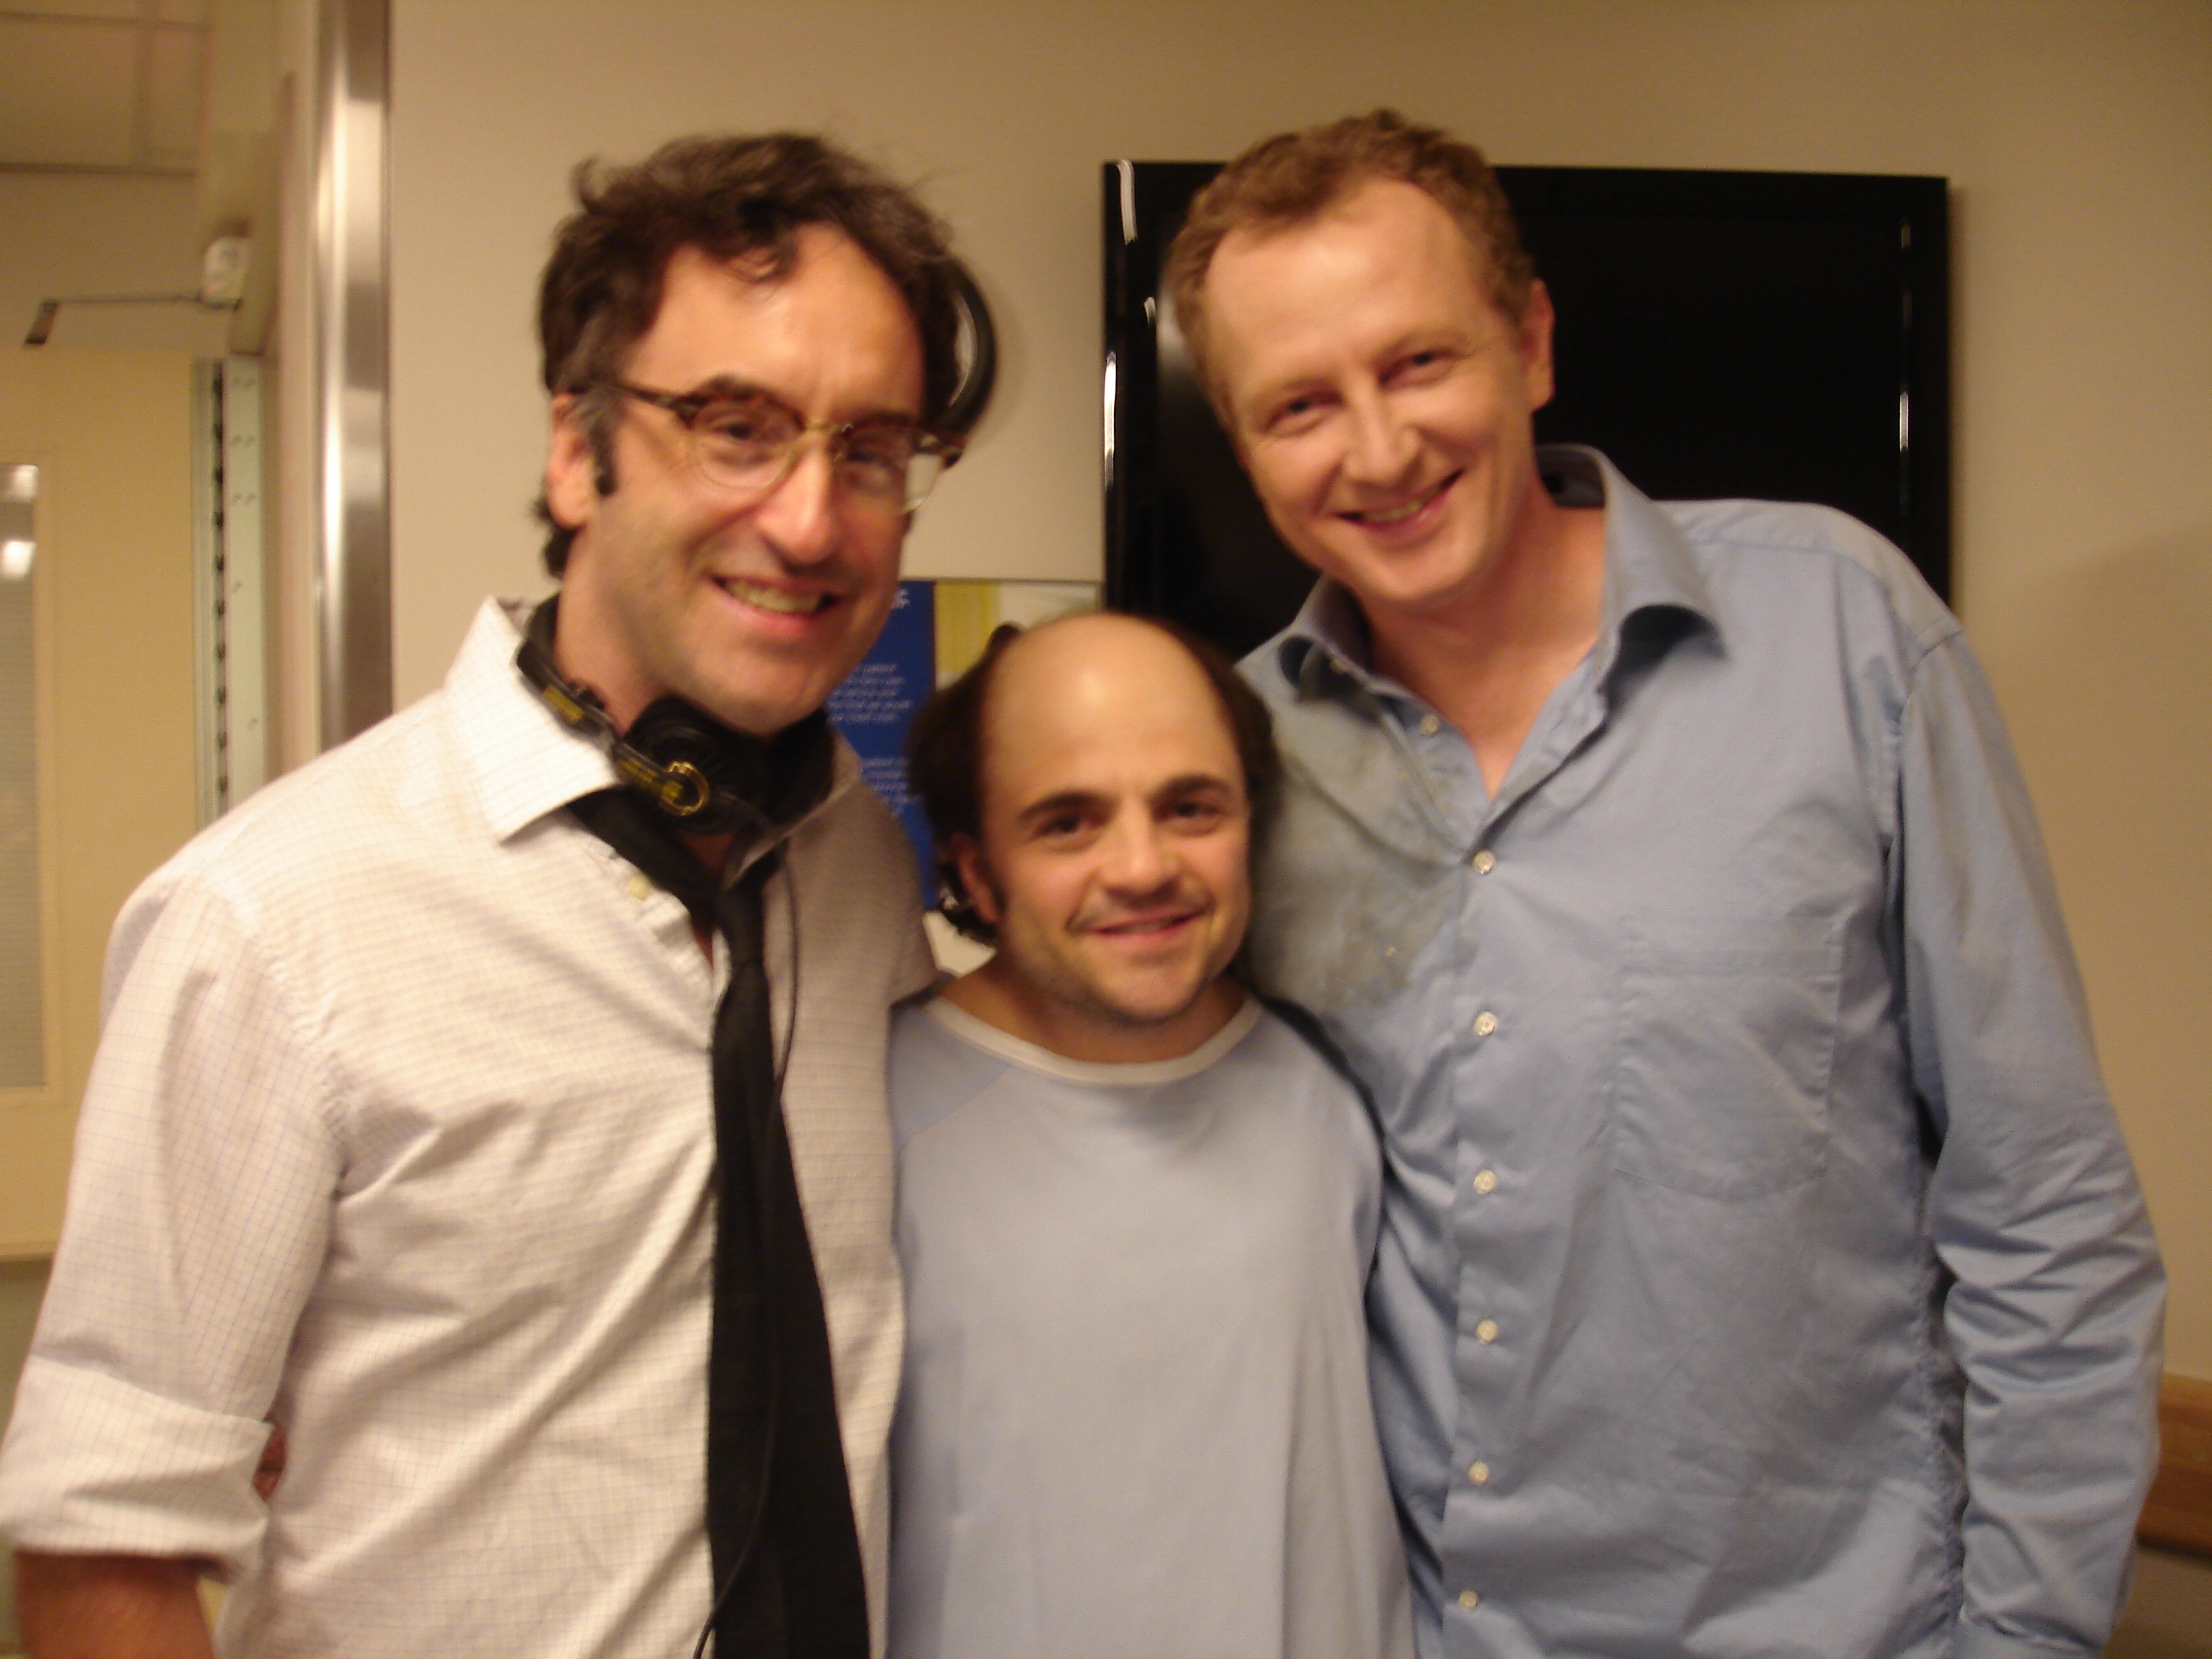 Michael with Don McKellar and Bob Martin on the set of 